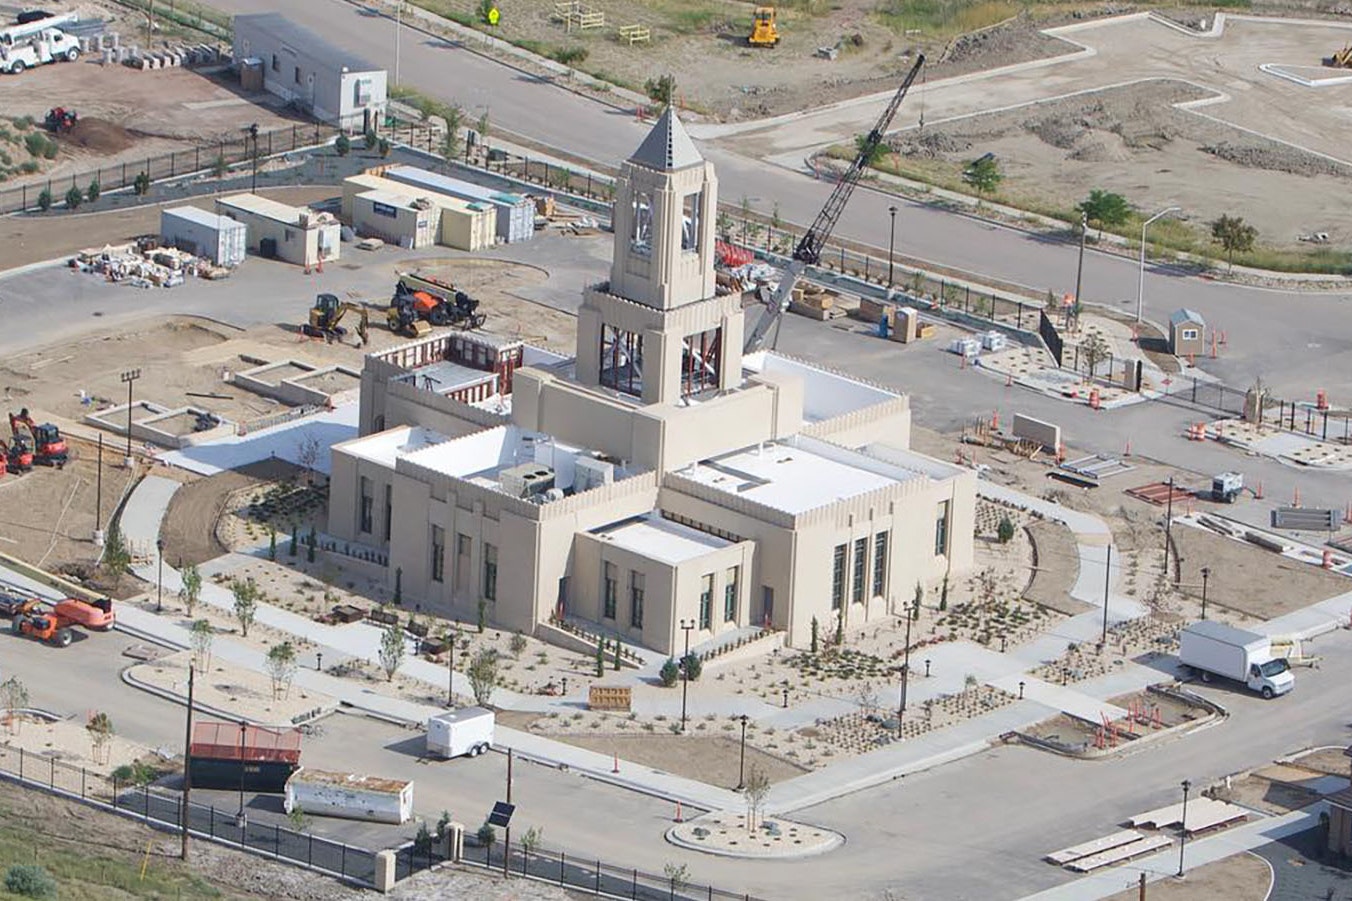 A Church of Jesus Christ of Latter-day Saints temple being built in Casper is similar to one planned for Cody, Wyoming.